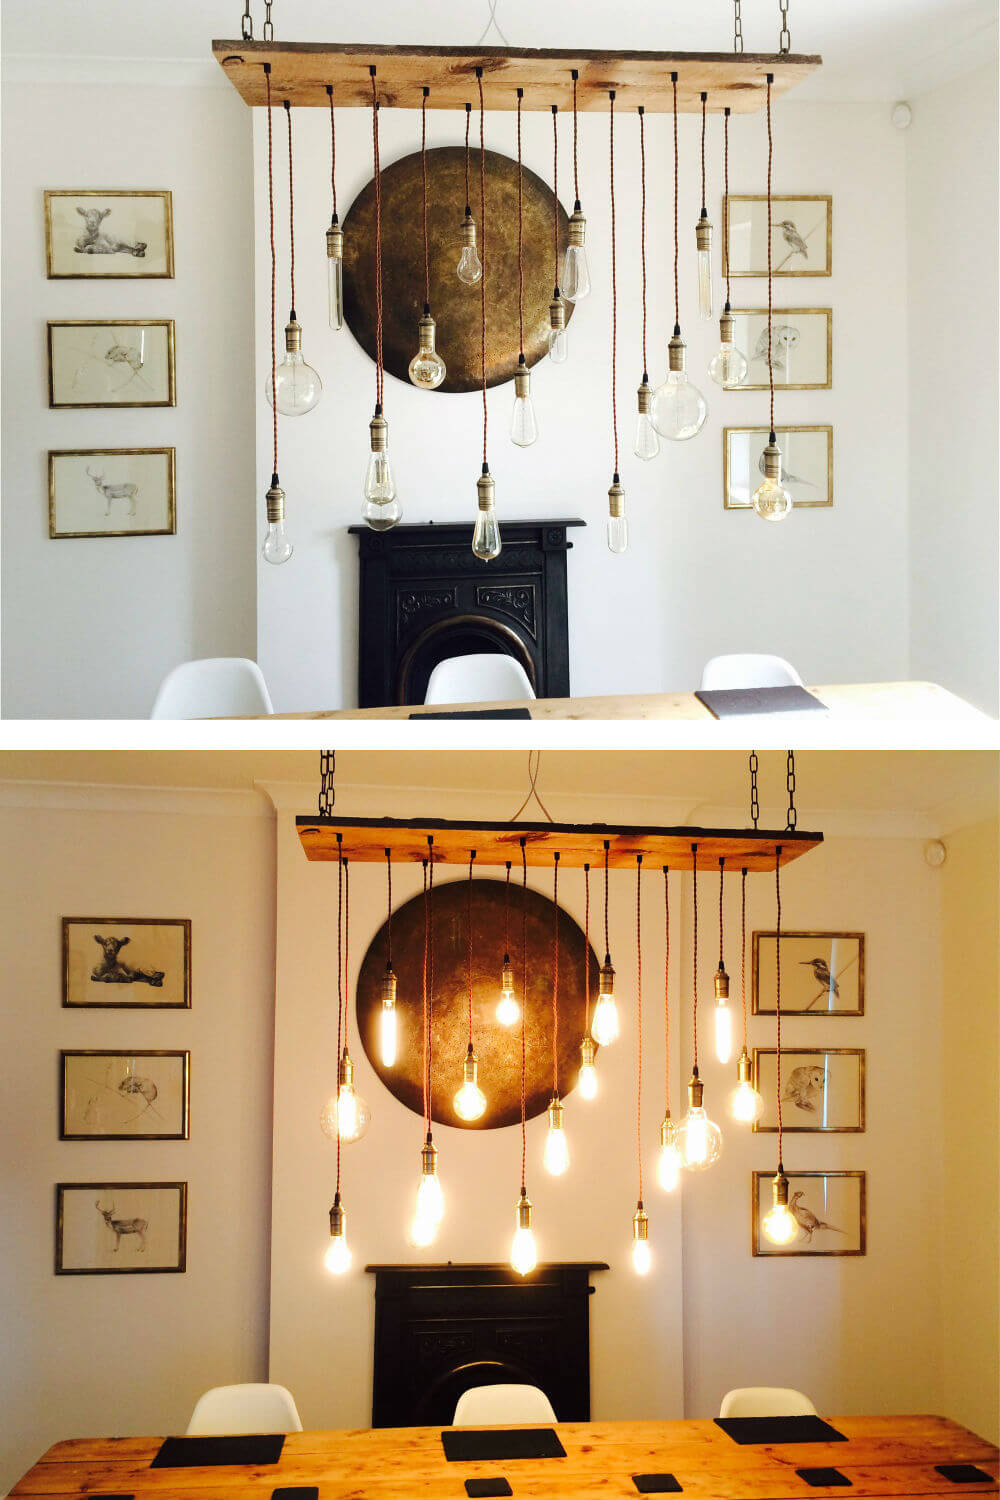 Rustic lighting illuminates any room in the home